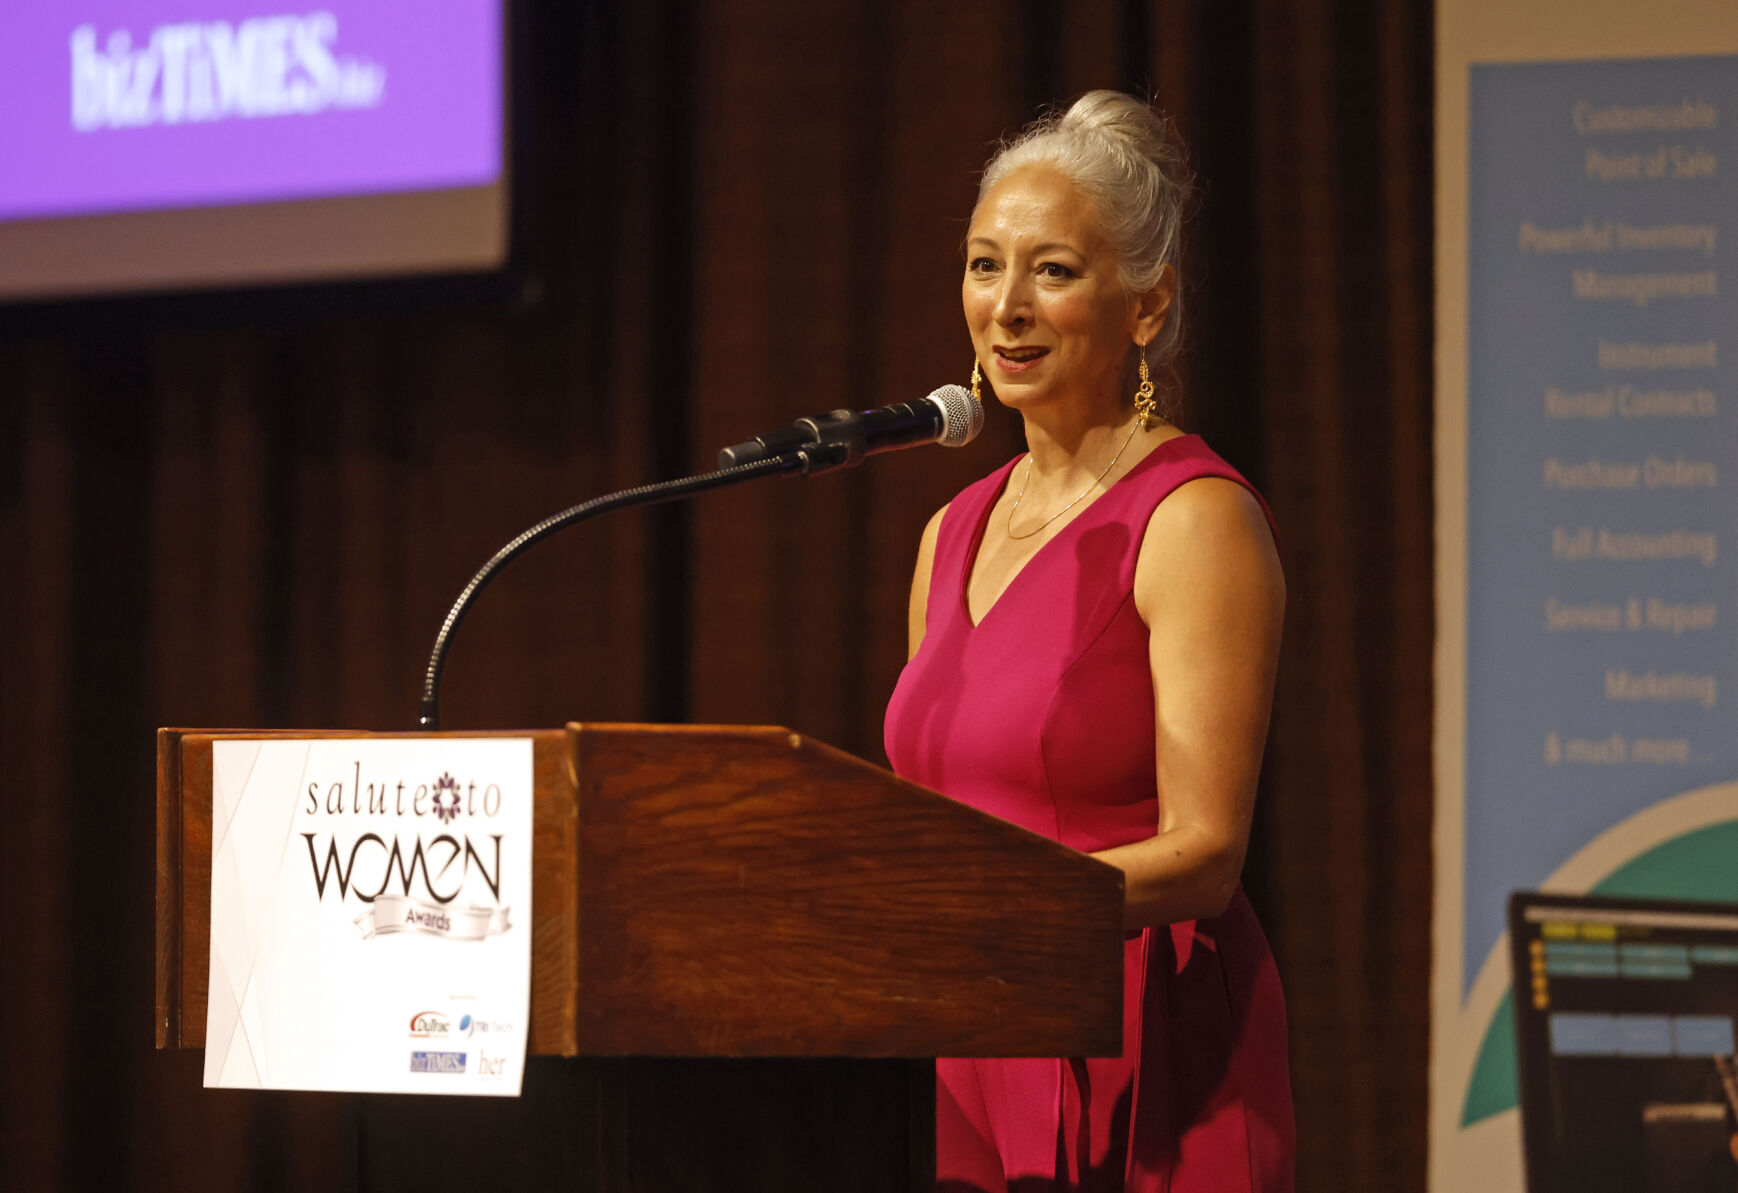 Leslie Shalabi, who received the award for Woman of the Year, speaks at the event.    PHOTO CREDIT: Jessica Reilly